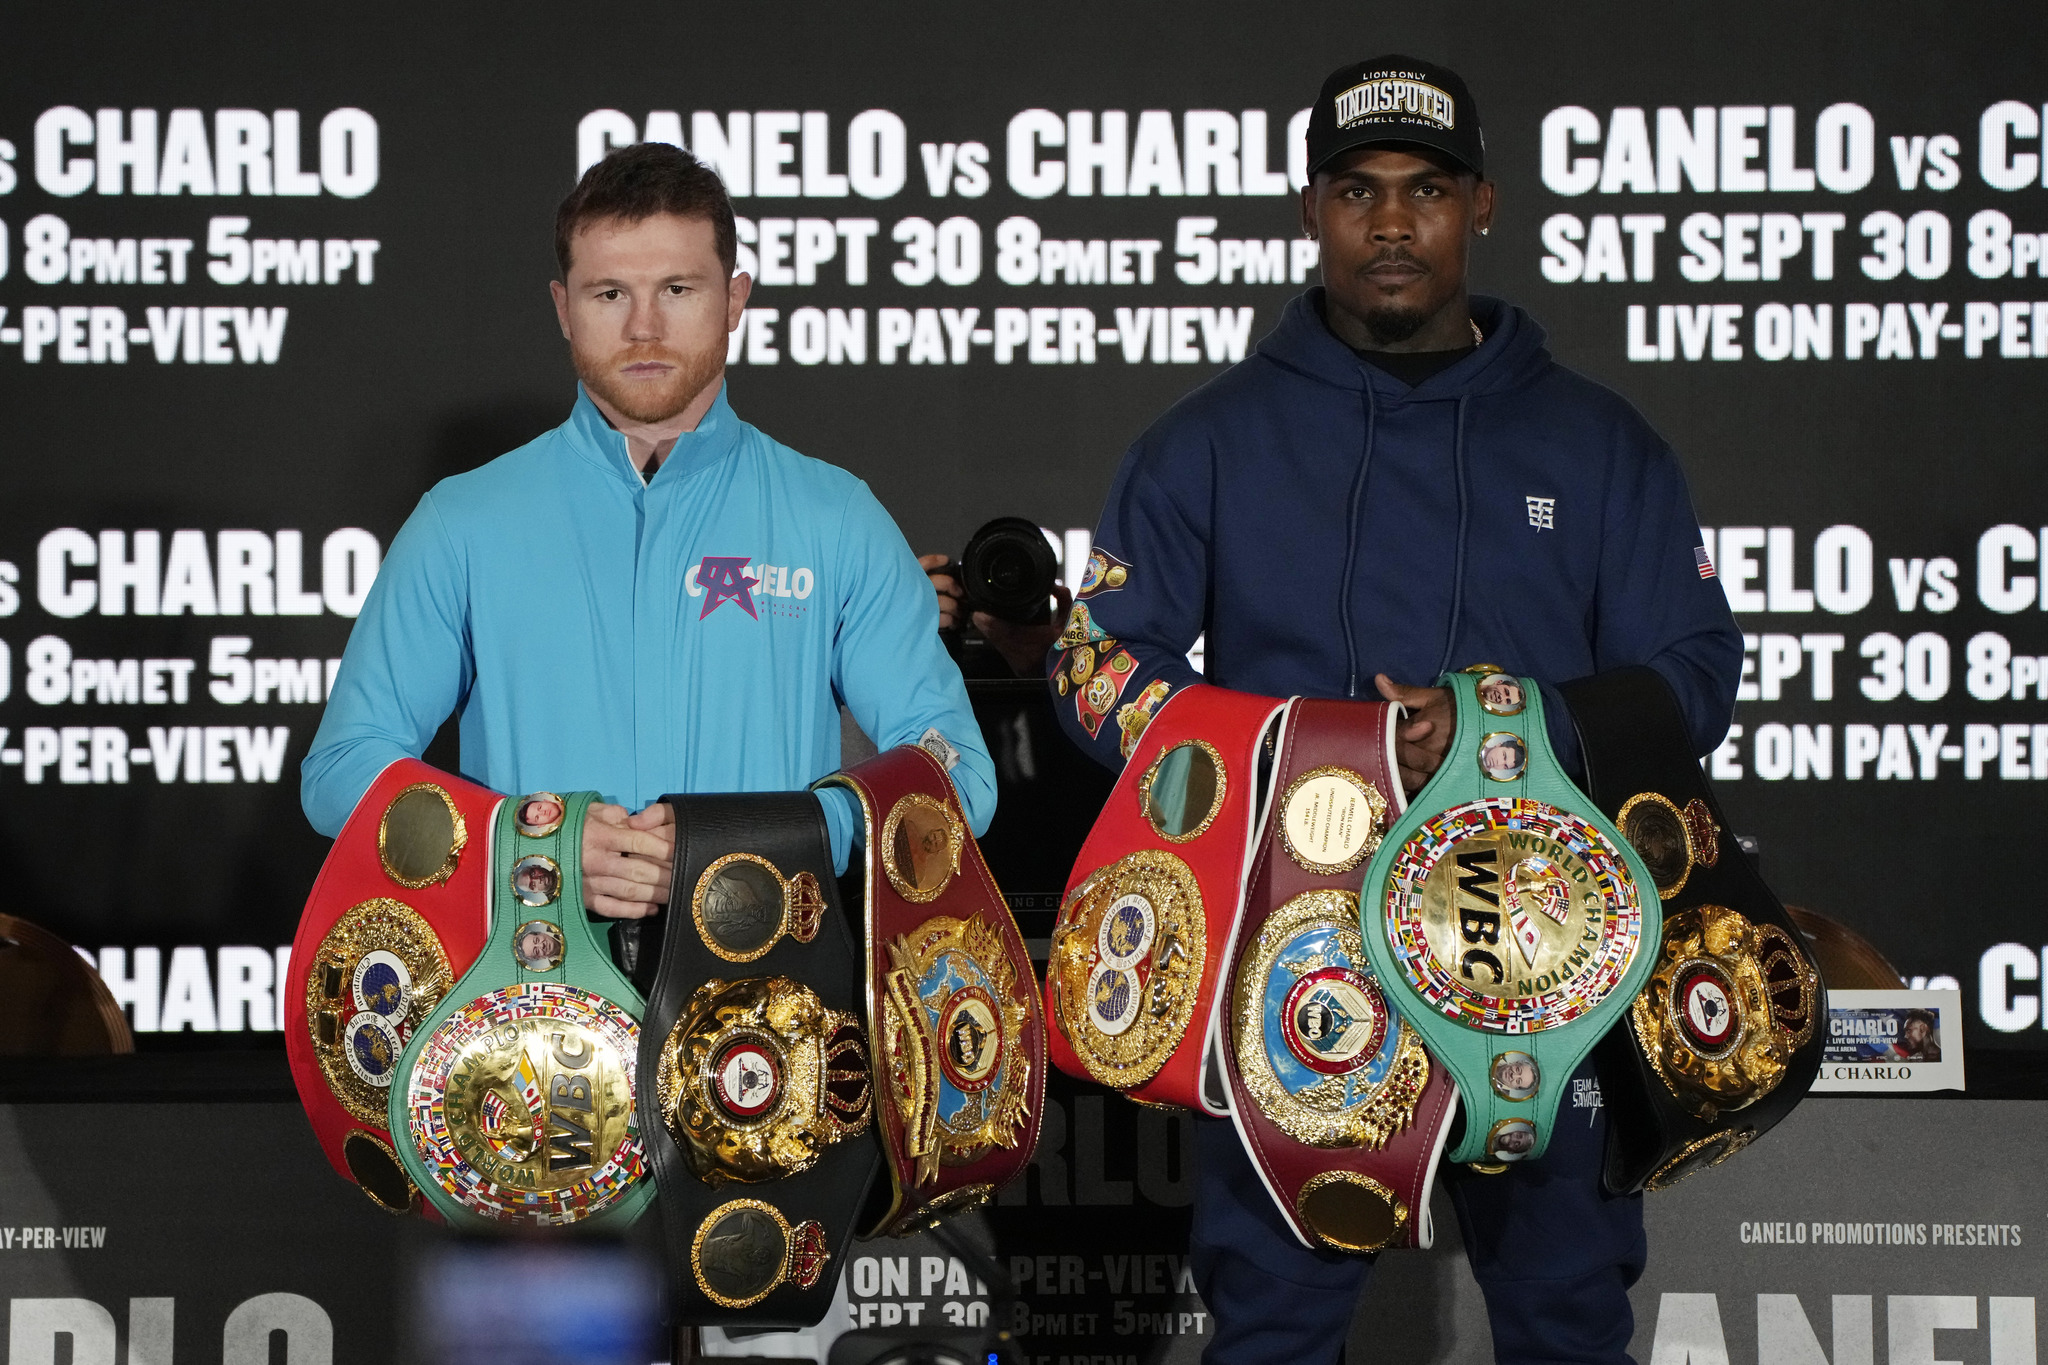 Canelo and Charlo pose with their belts